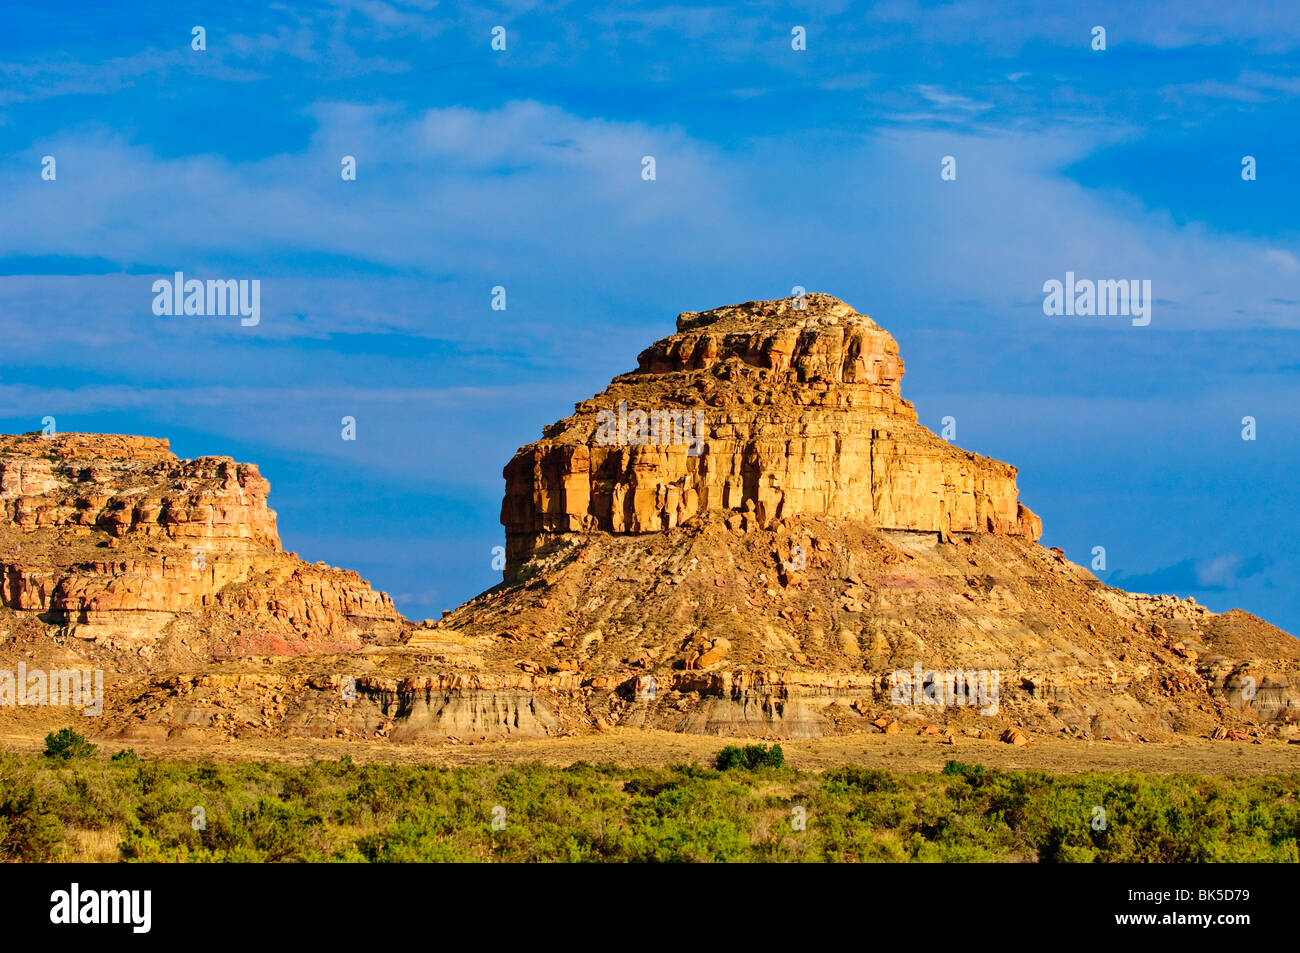 A sandstone butte in Chaco Culture National Historical Park scenery, New Mexico, United States of America, North America Stock Photo